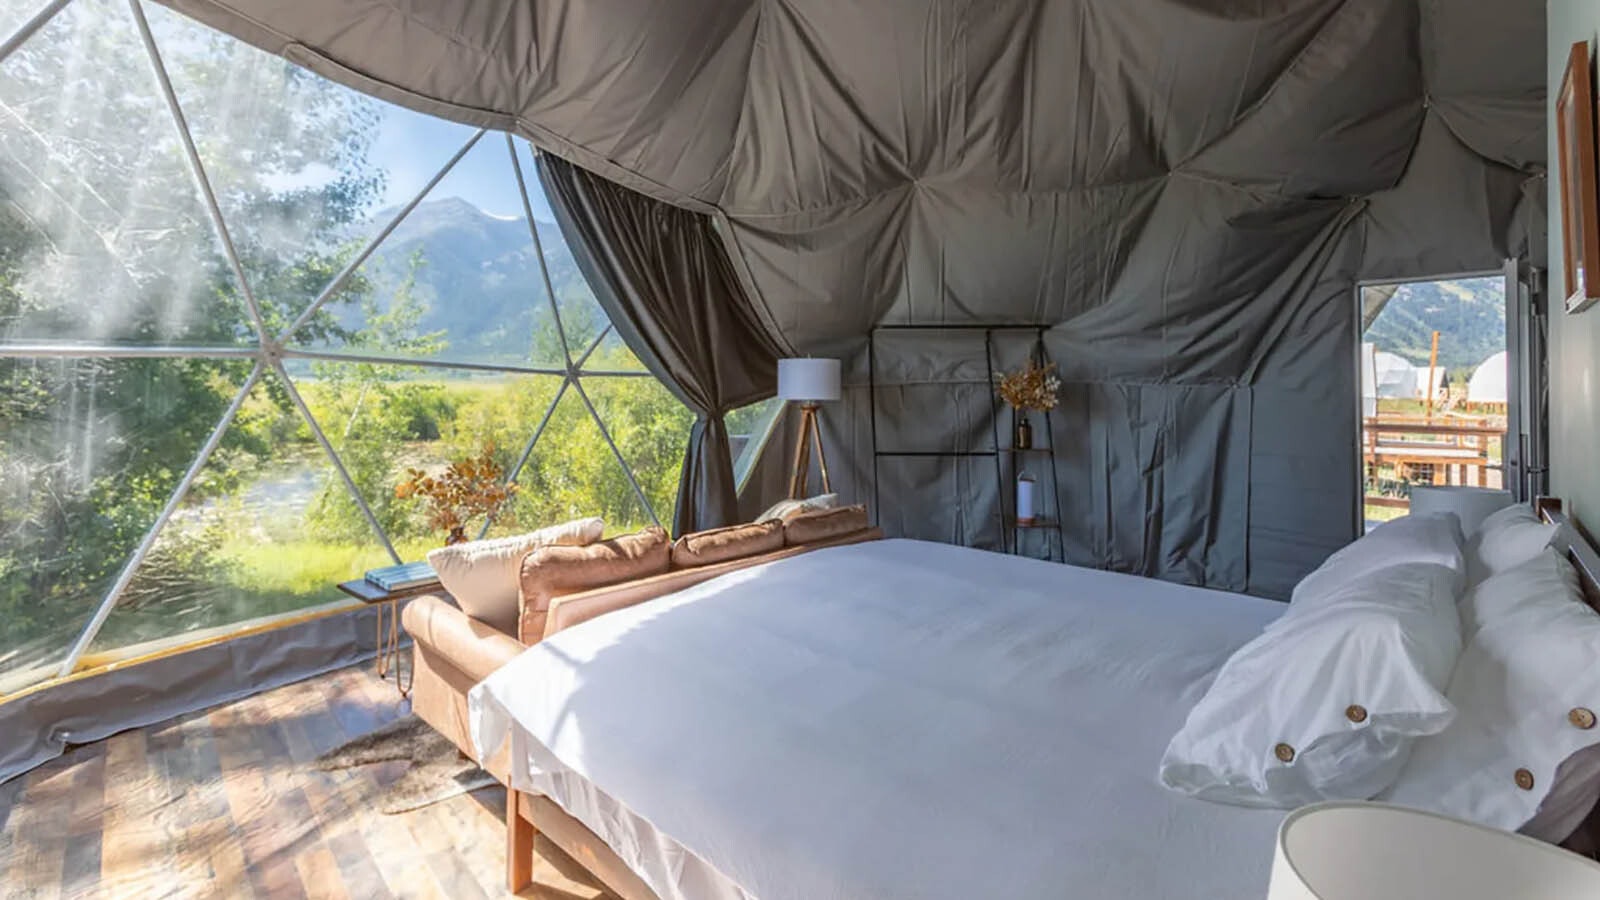 Inside one of Basecamp Hospitality's high-end camping tents.